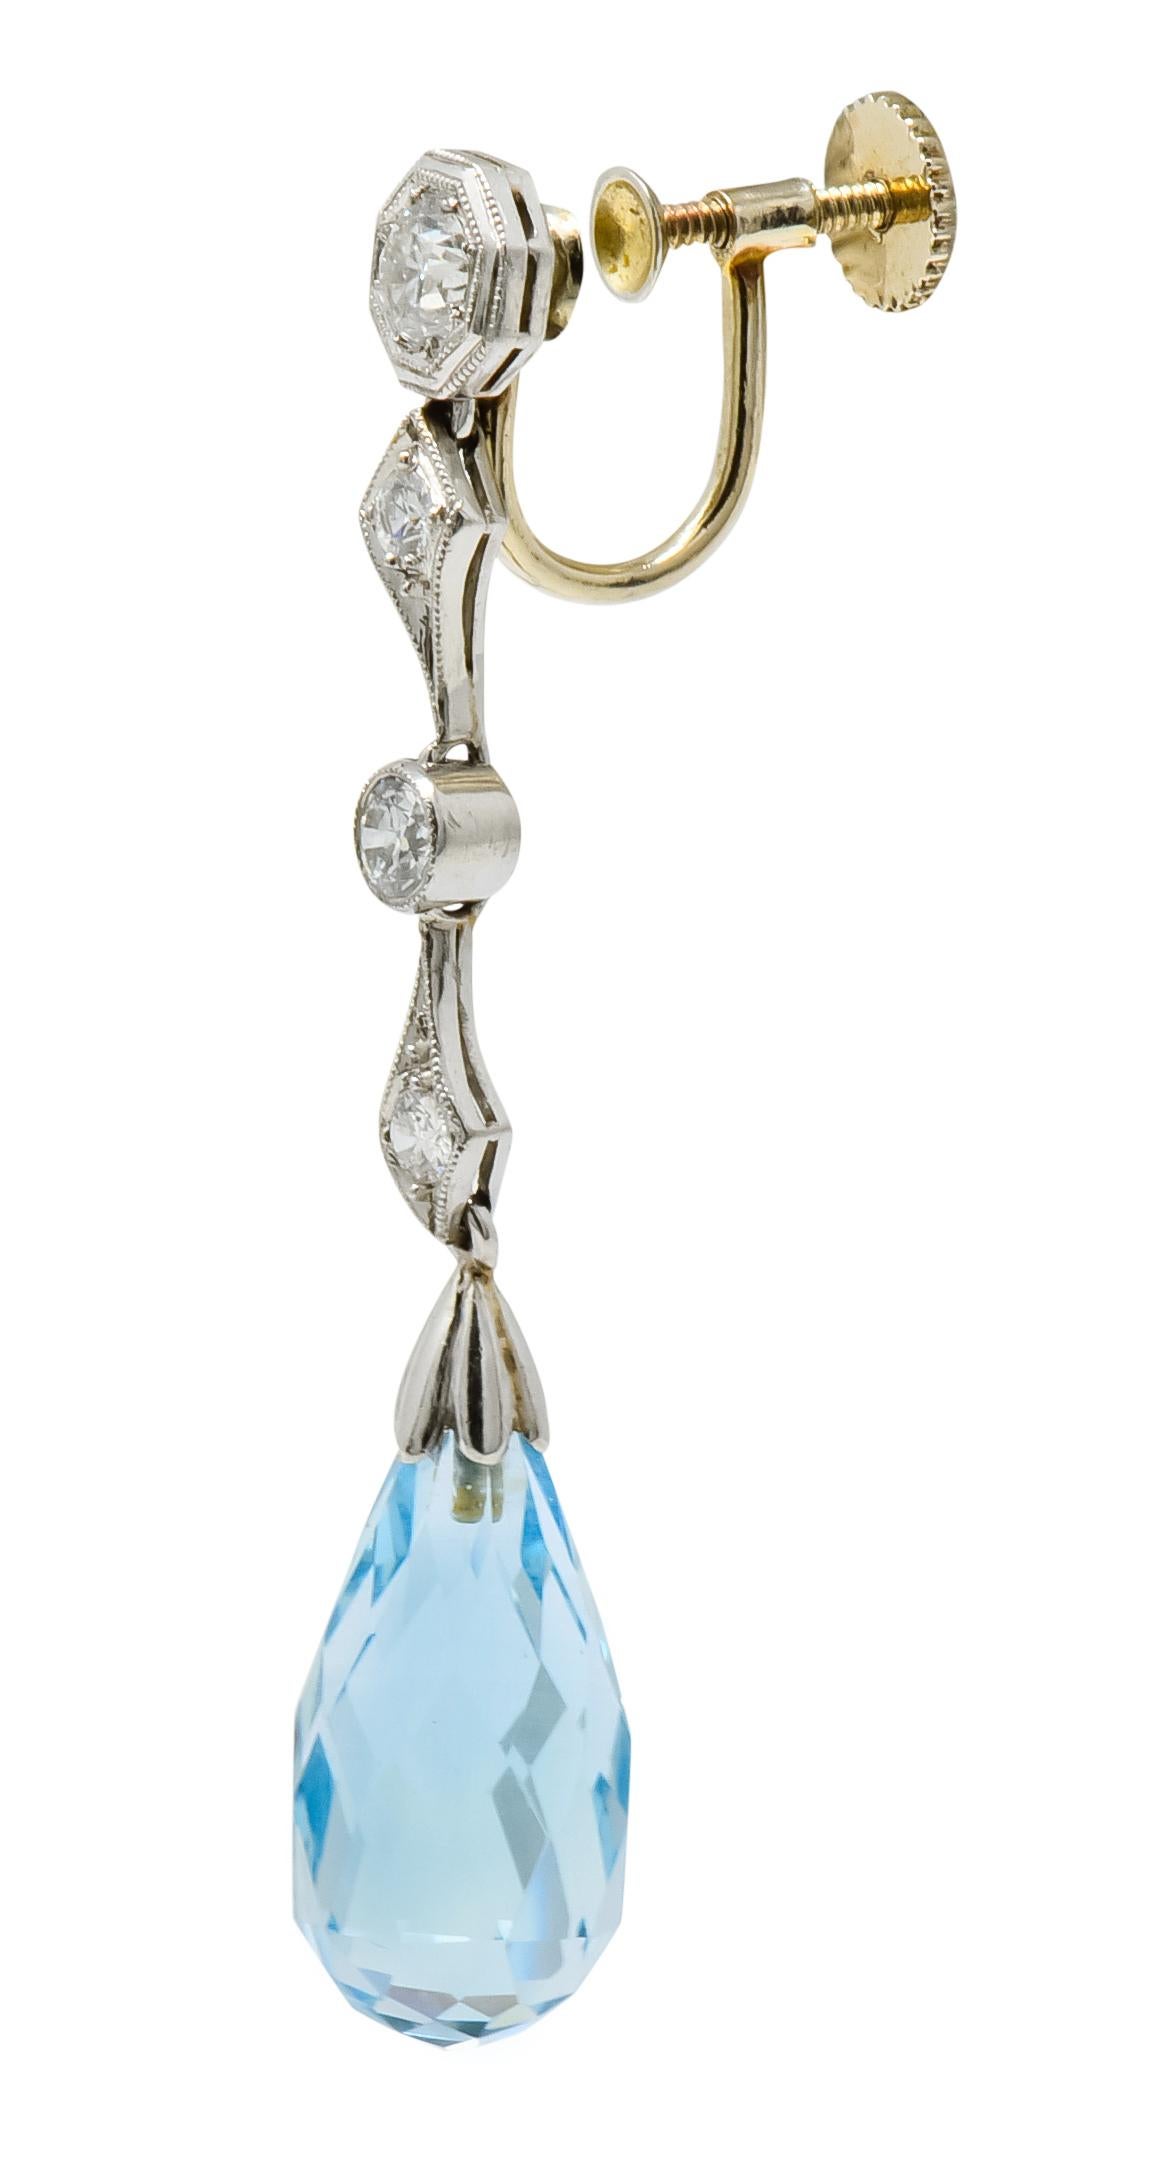 Each earring designed with four geometric platinum links, bead set with old European cut diamonds weighing approximately 0.70 carat total; H/I color and VS clarity

With milgrain detail and articulation, links suspend a briolette cut aquamarine